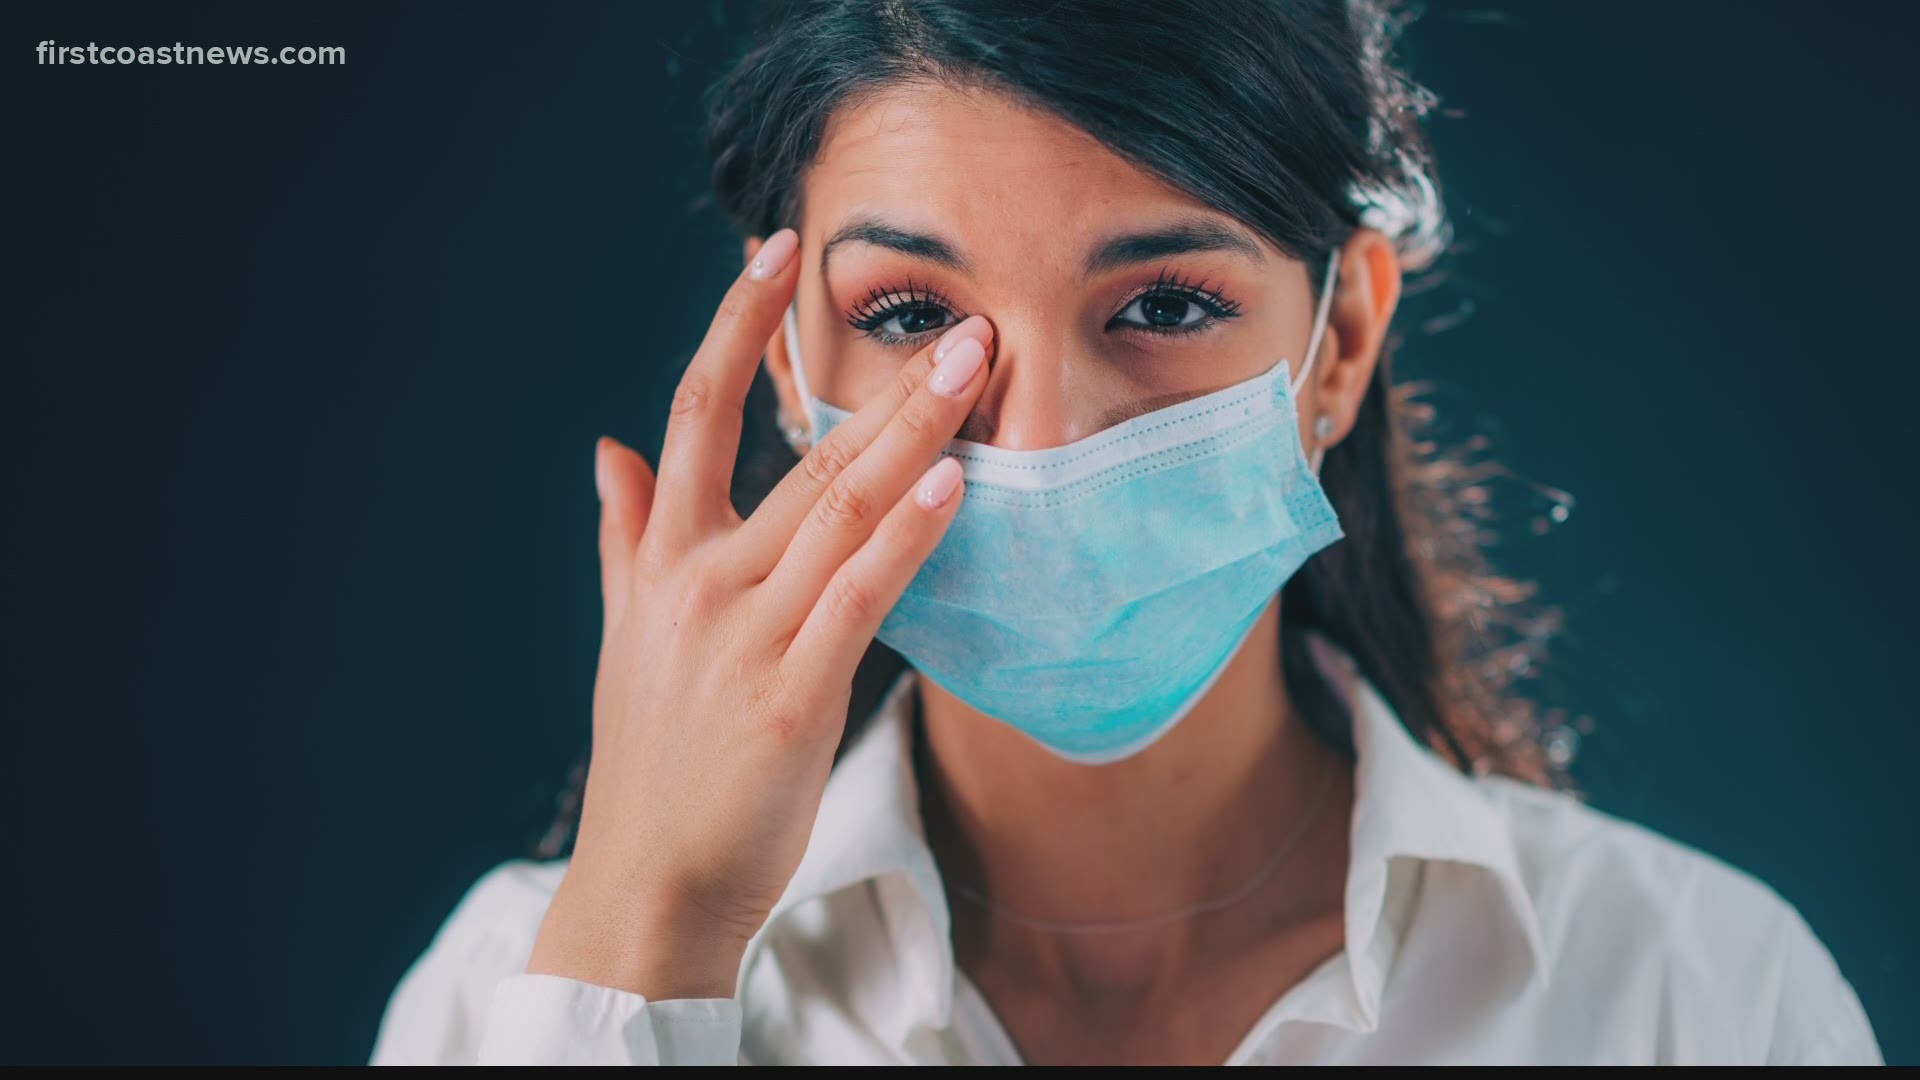 Watery, itchy and red eyes? It could be your face mask causing dry eyes. Doctors say make sure masks are tight-fitting around the nose to avoid those symptoms.